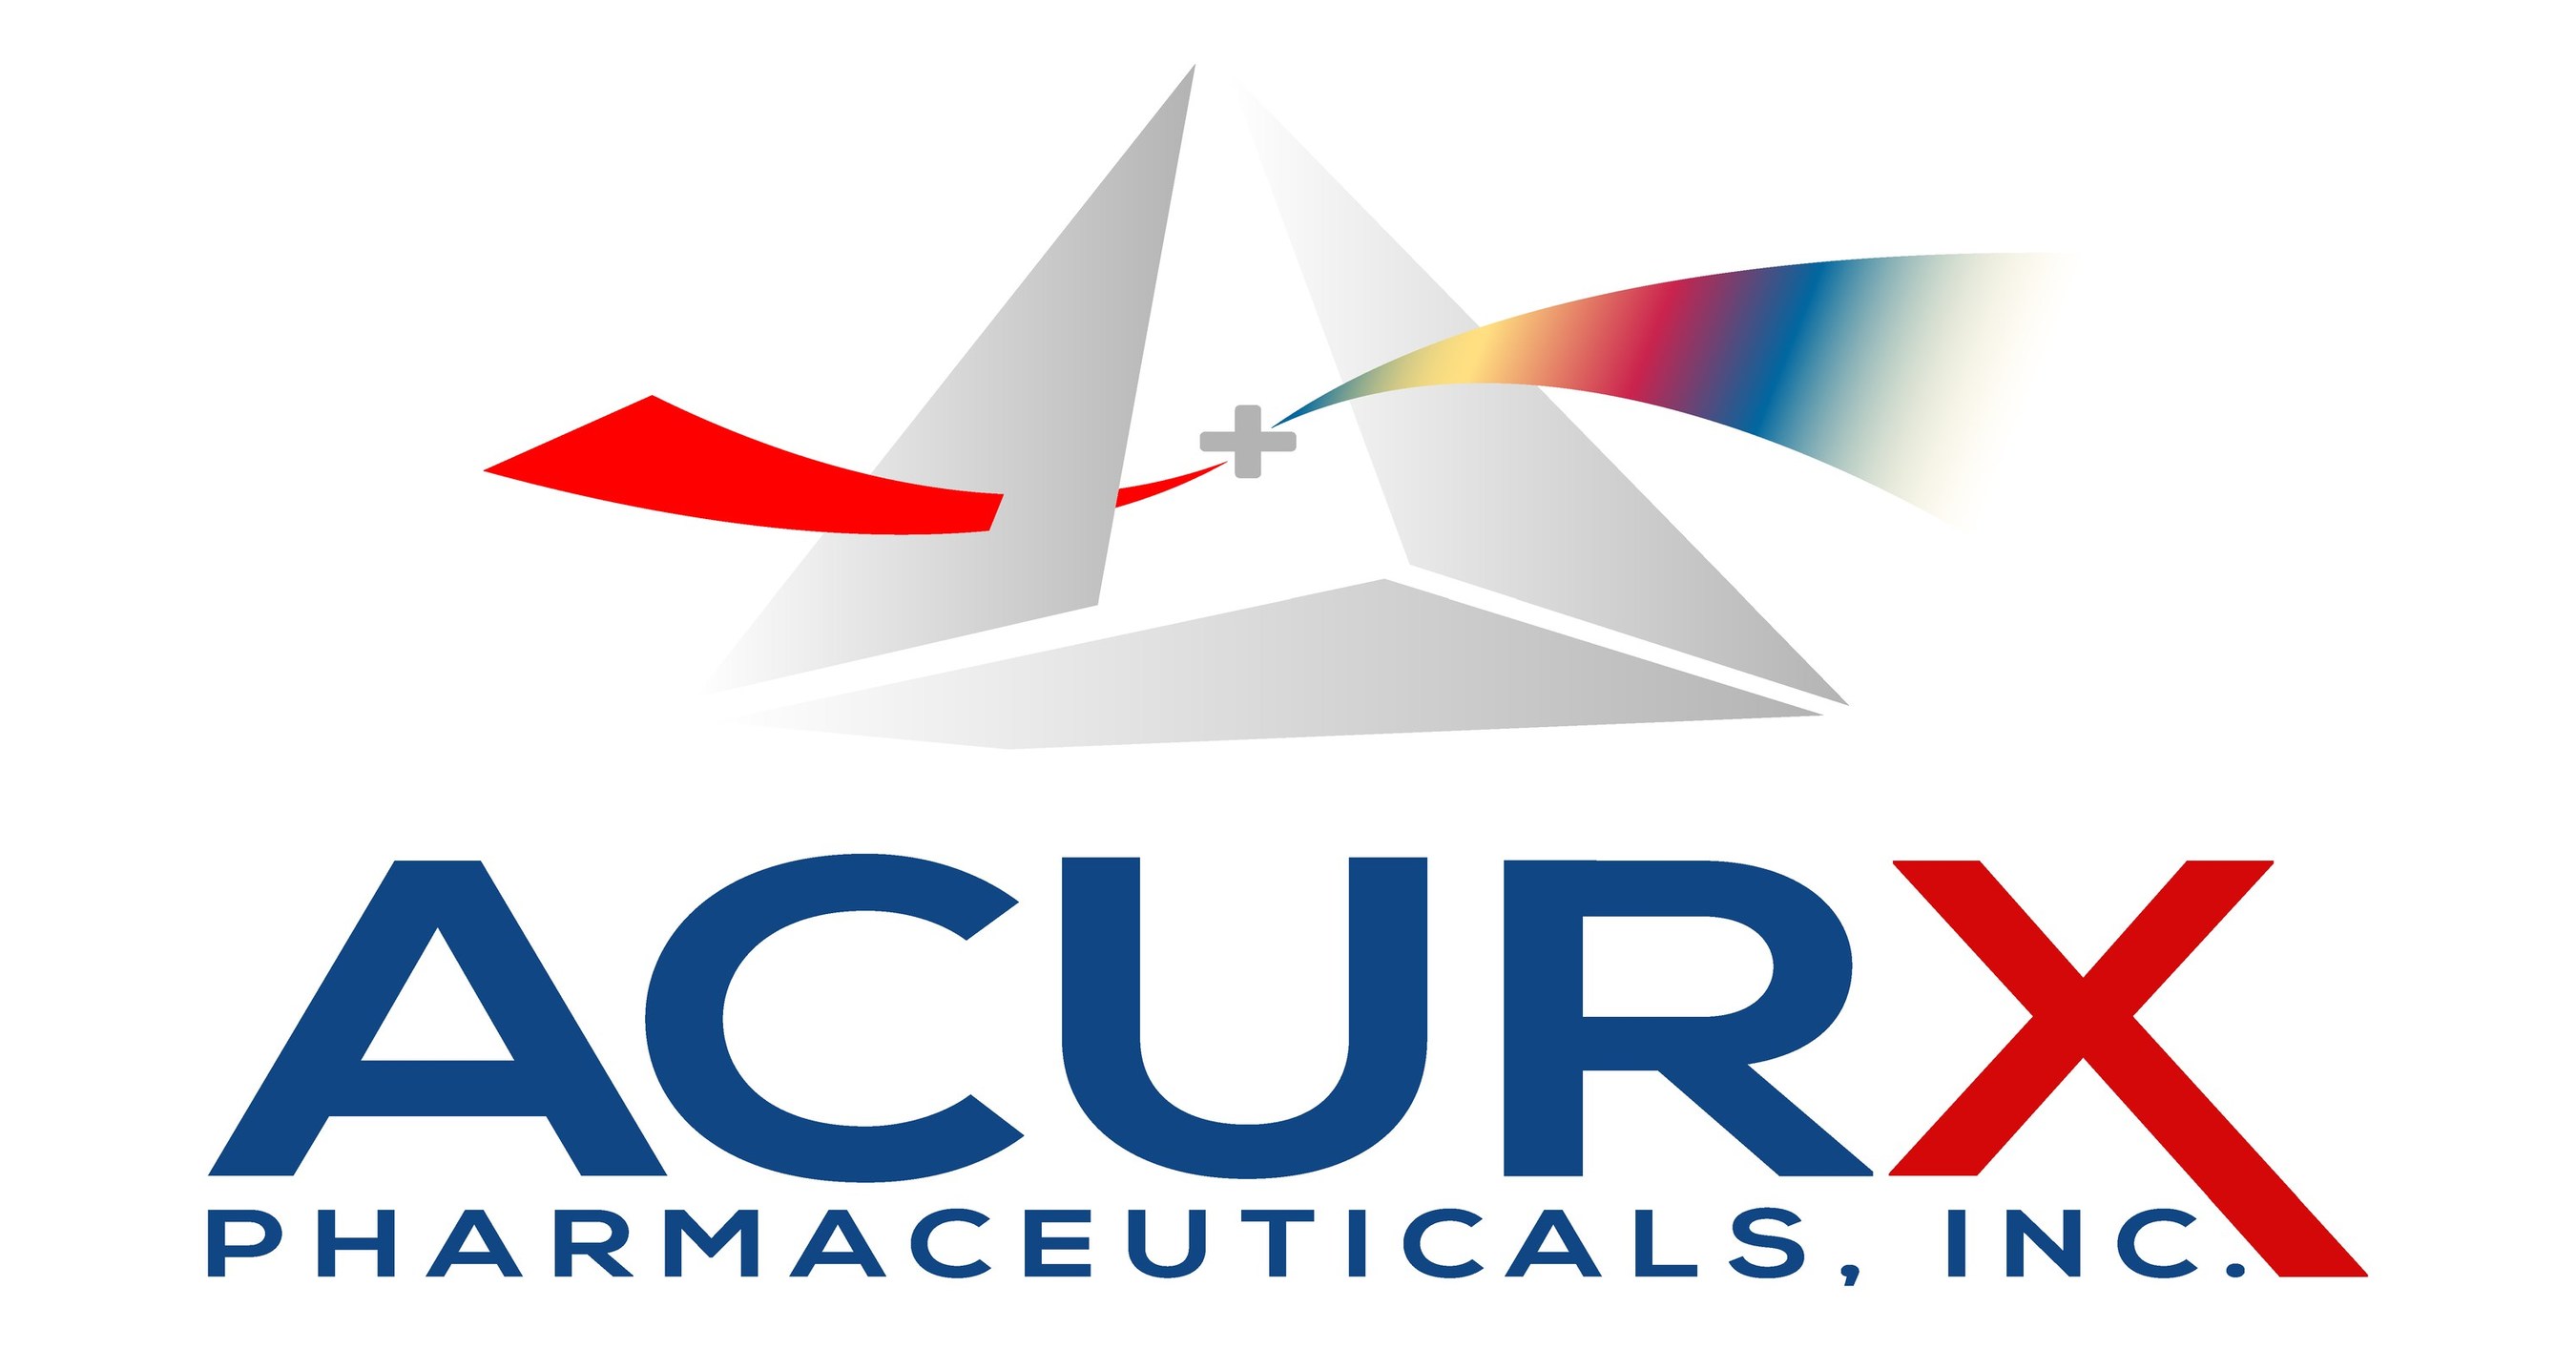 Race To The Cure: Here's Why Acurx Pharmaceuticals Could Win The Battle To Treat C. difficile ($ACXP)